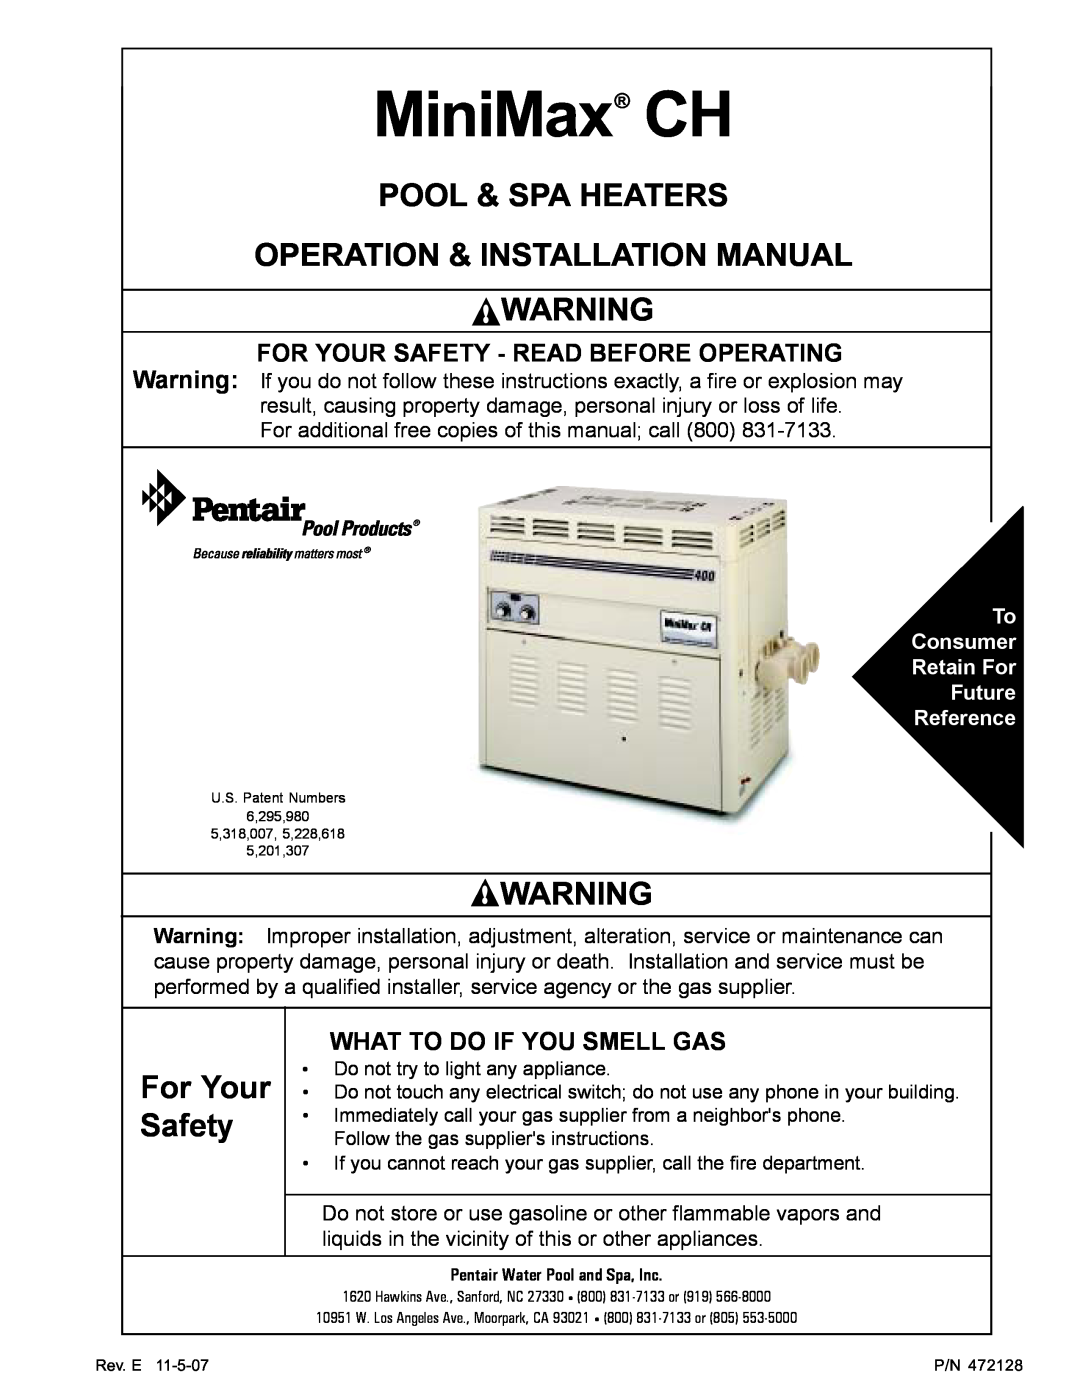 Pentair Hot Tub manual MiniMax CH, Pool & Spa Heaters Operation & Installation Manual, For Your Safety 